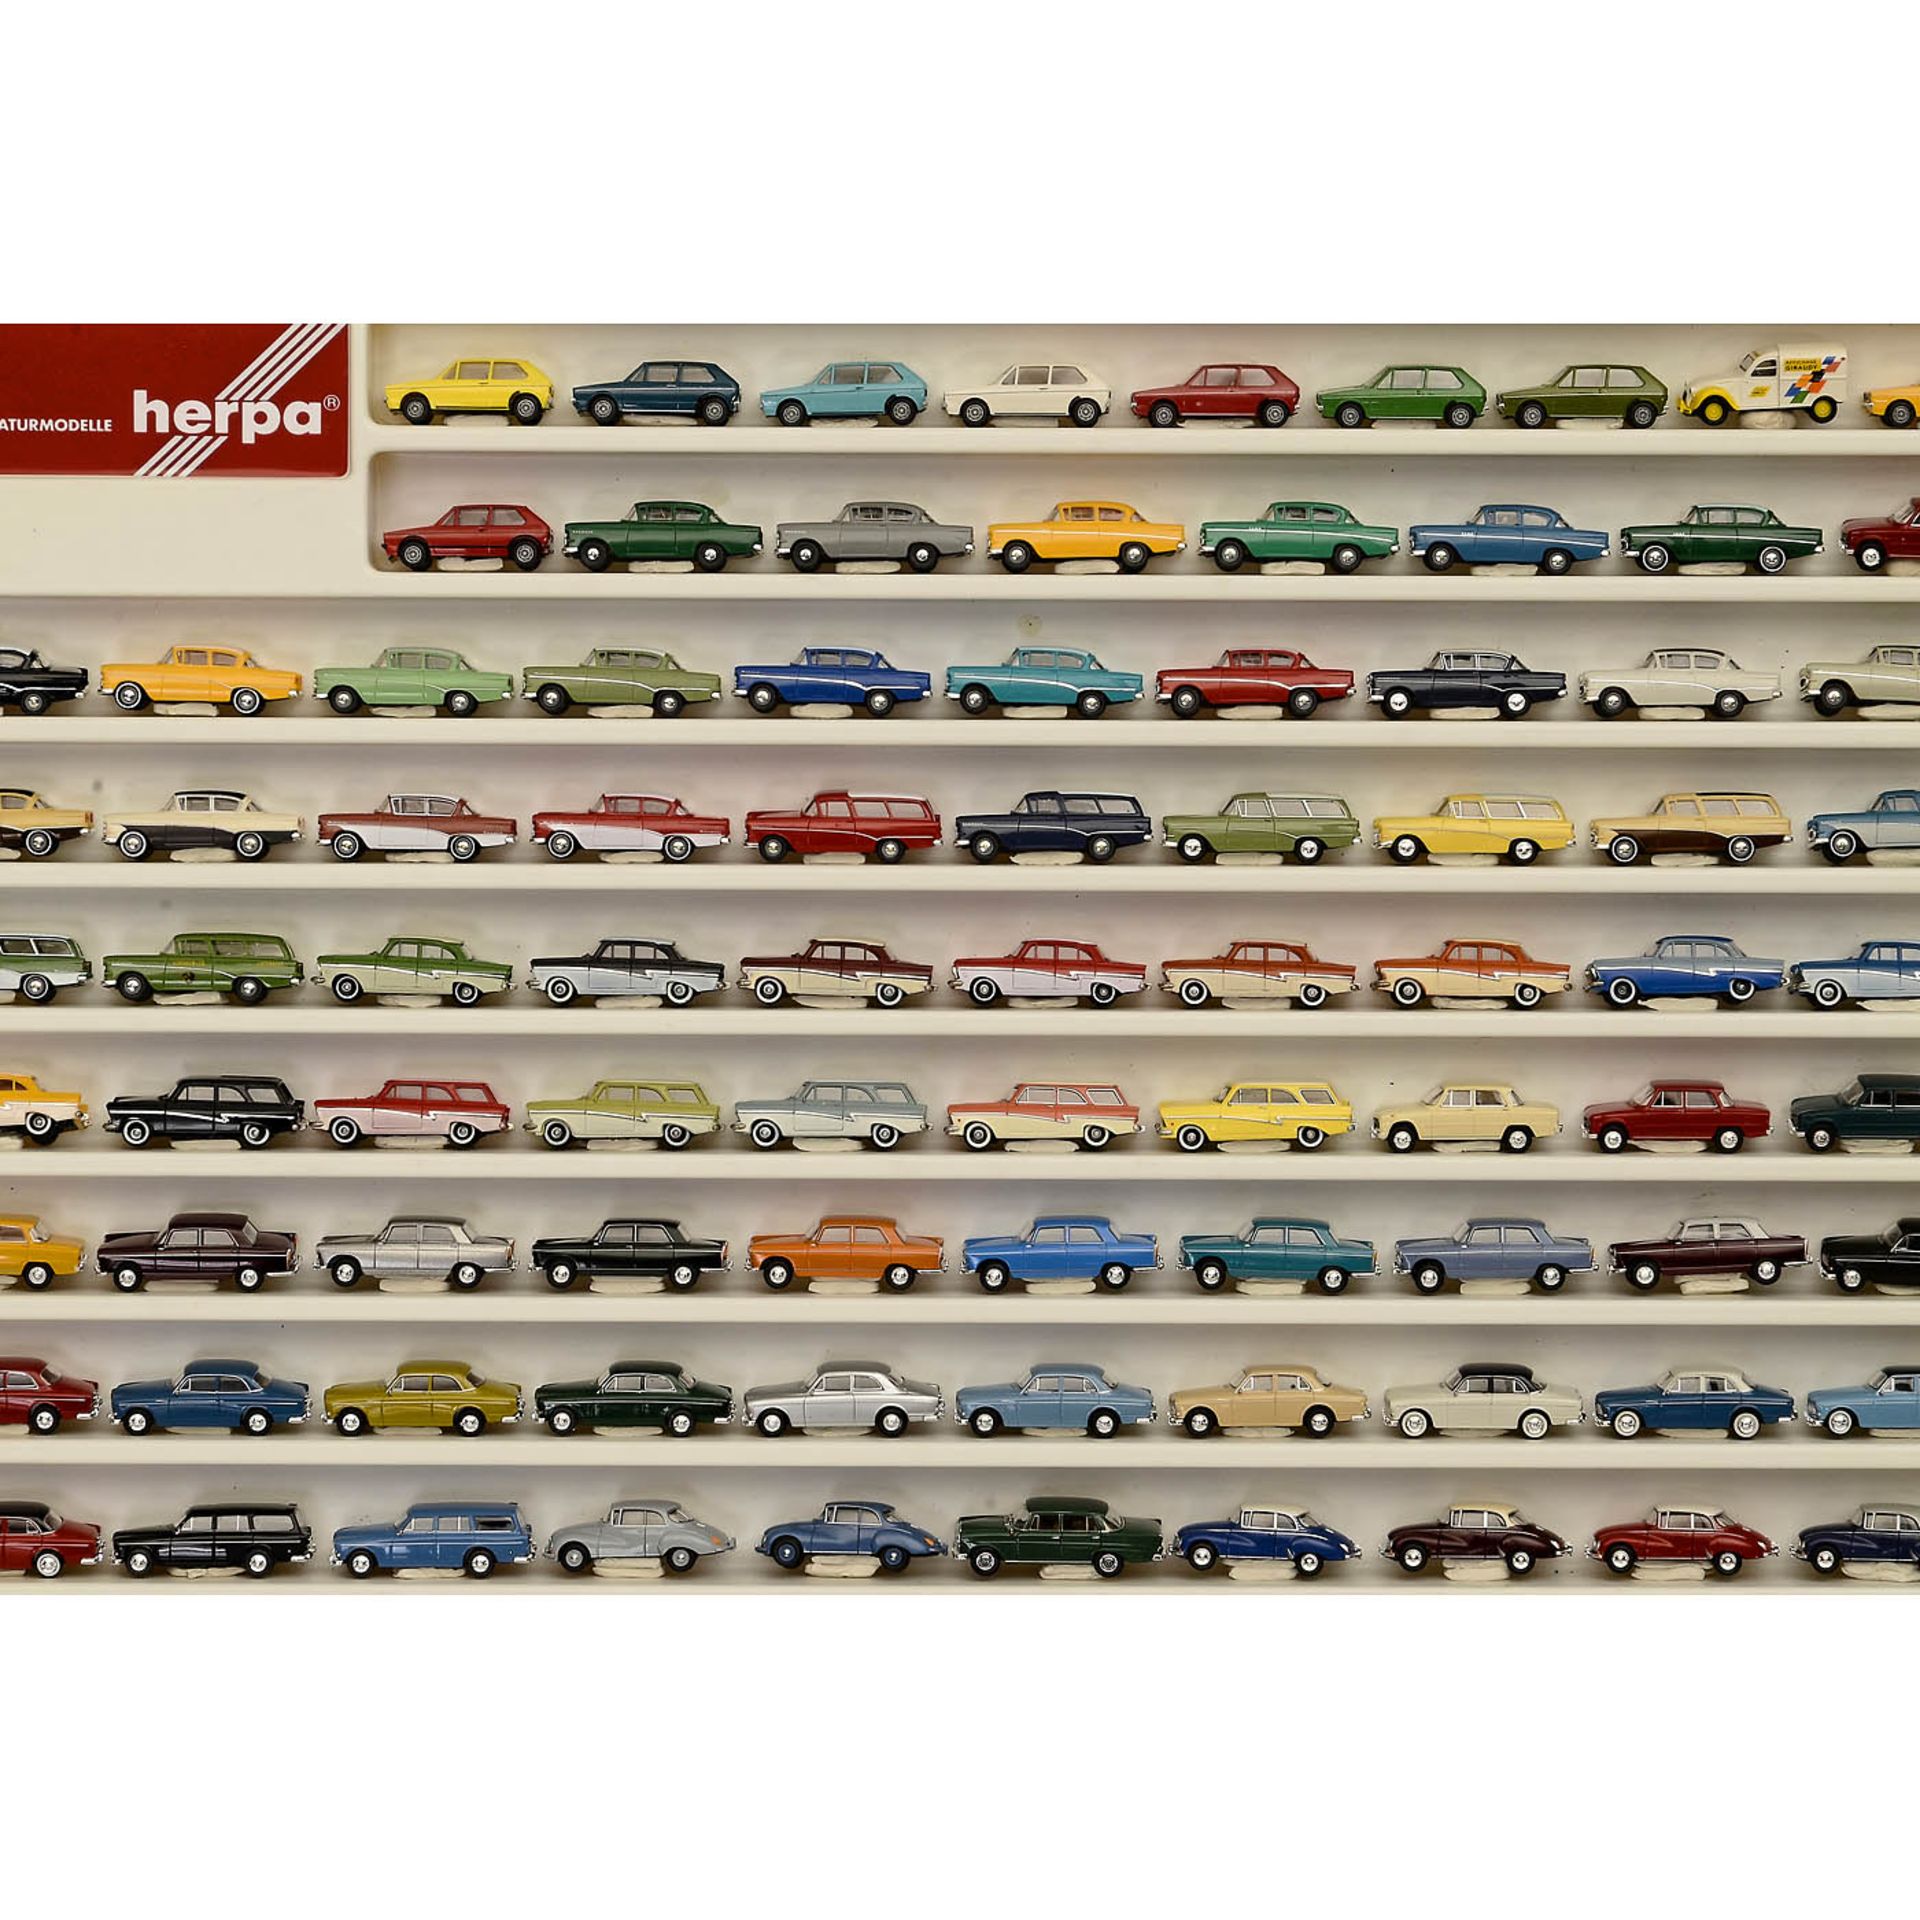 Large Collection of 1:87 Scale Model Cars - Image 2 of 8